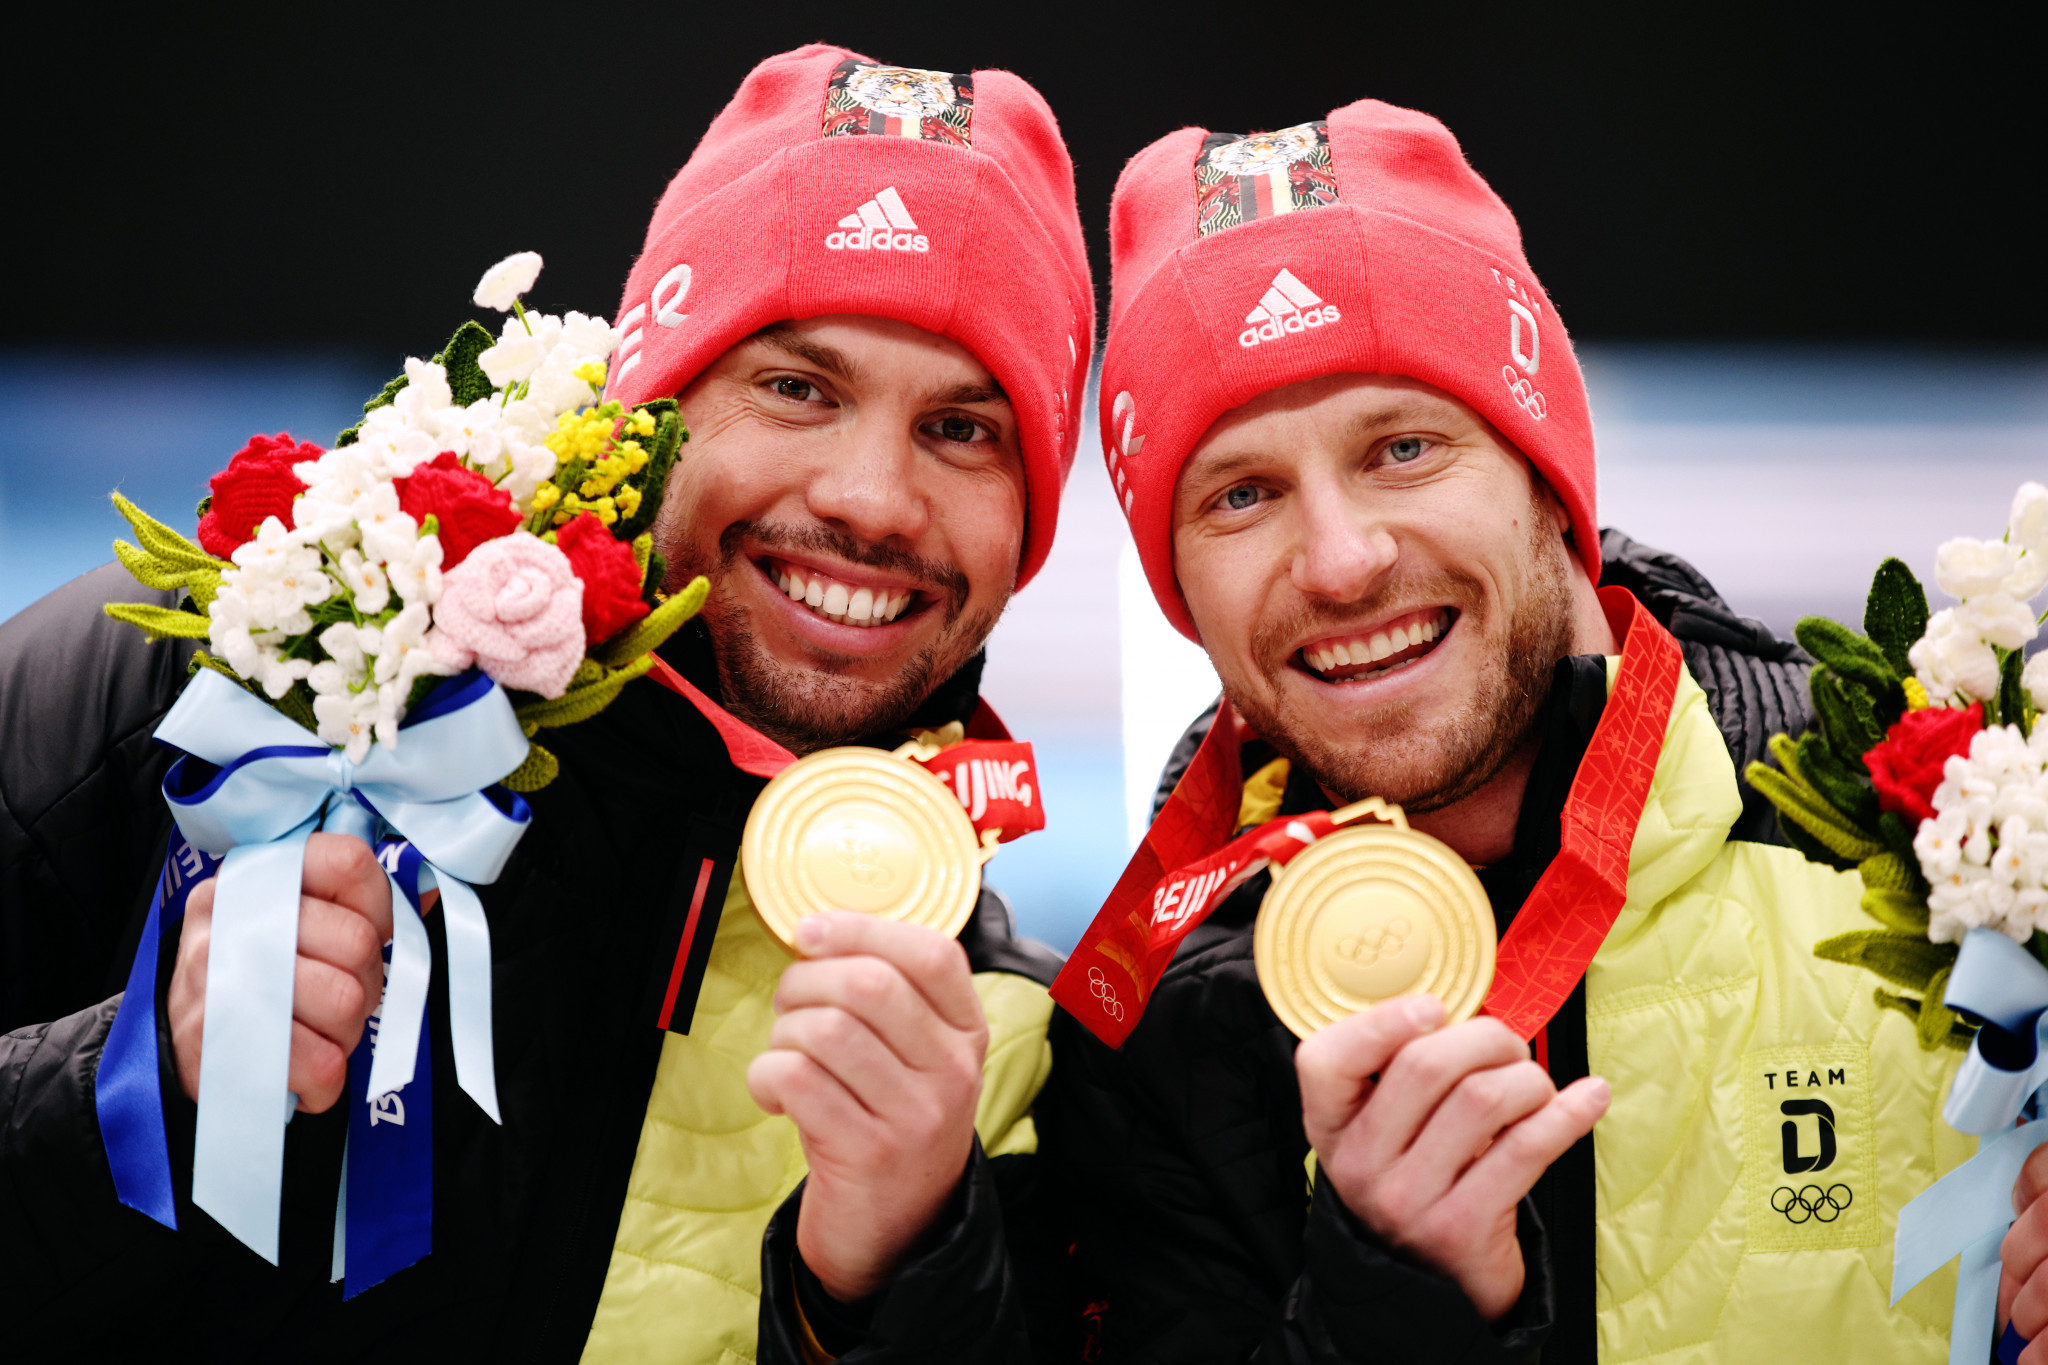 Tobias Wendl and Tobias Arlt earned the gold by 0.099 seconds ©Getty Images